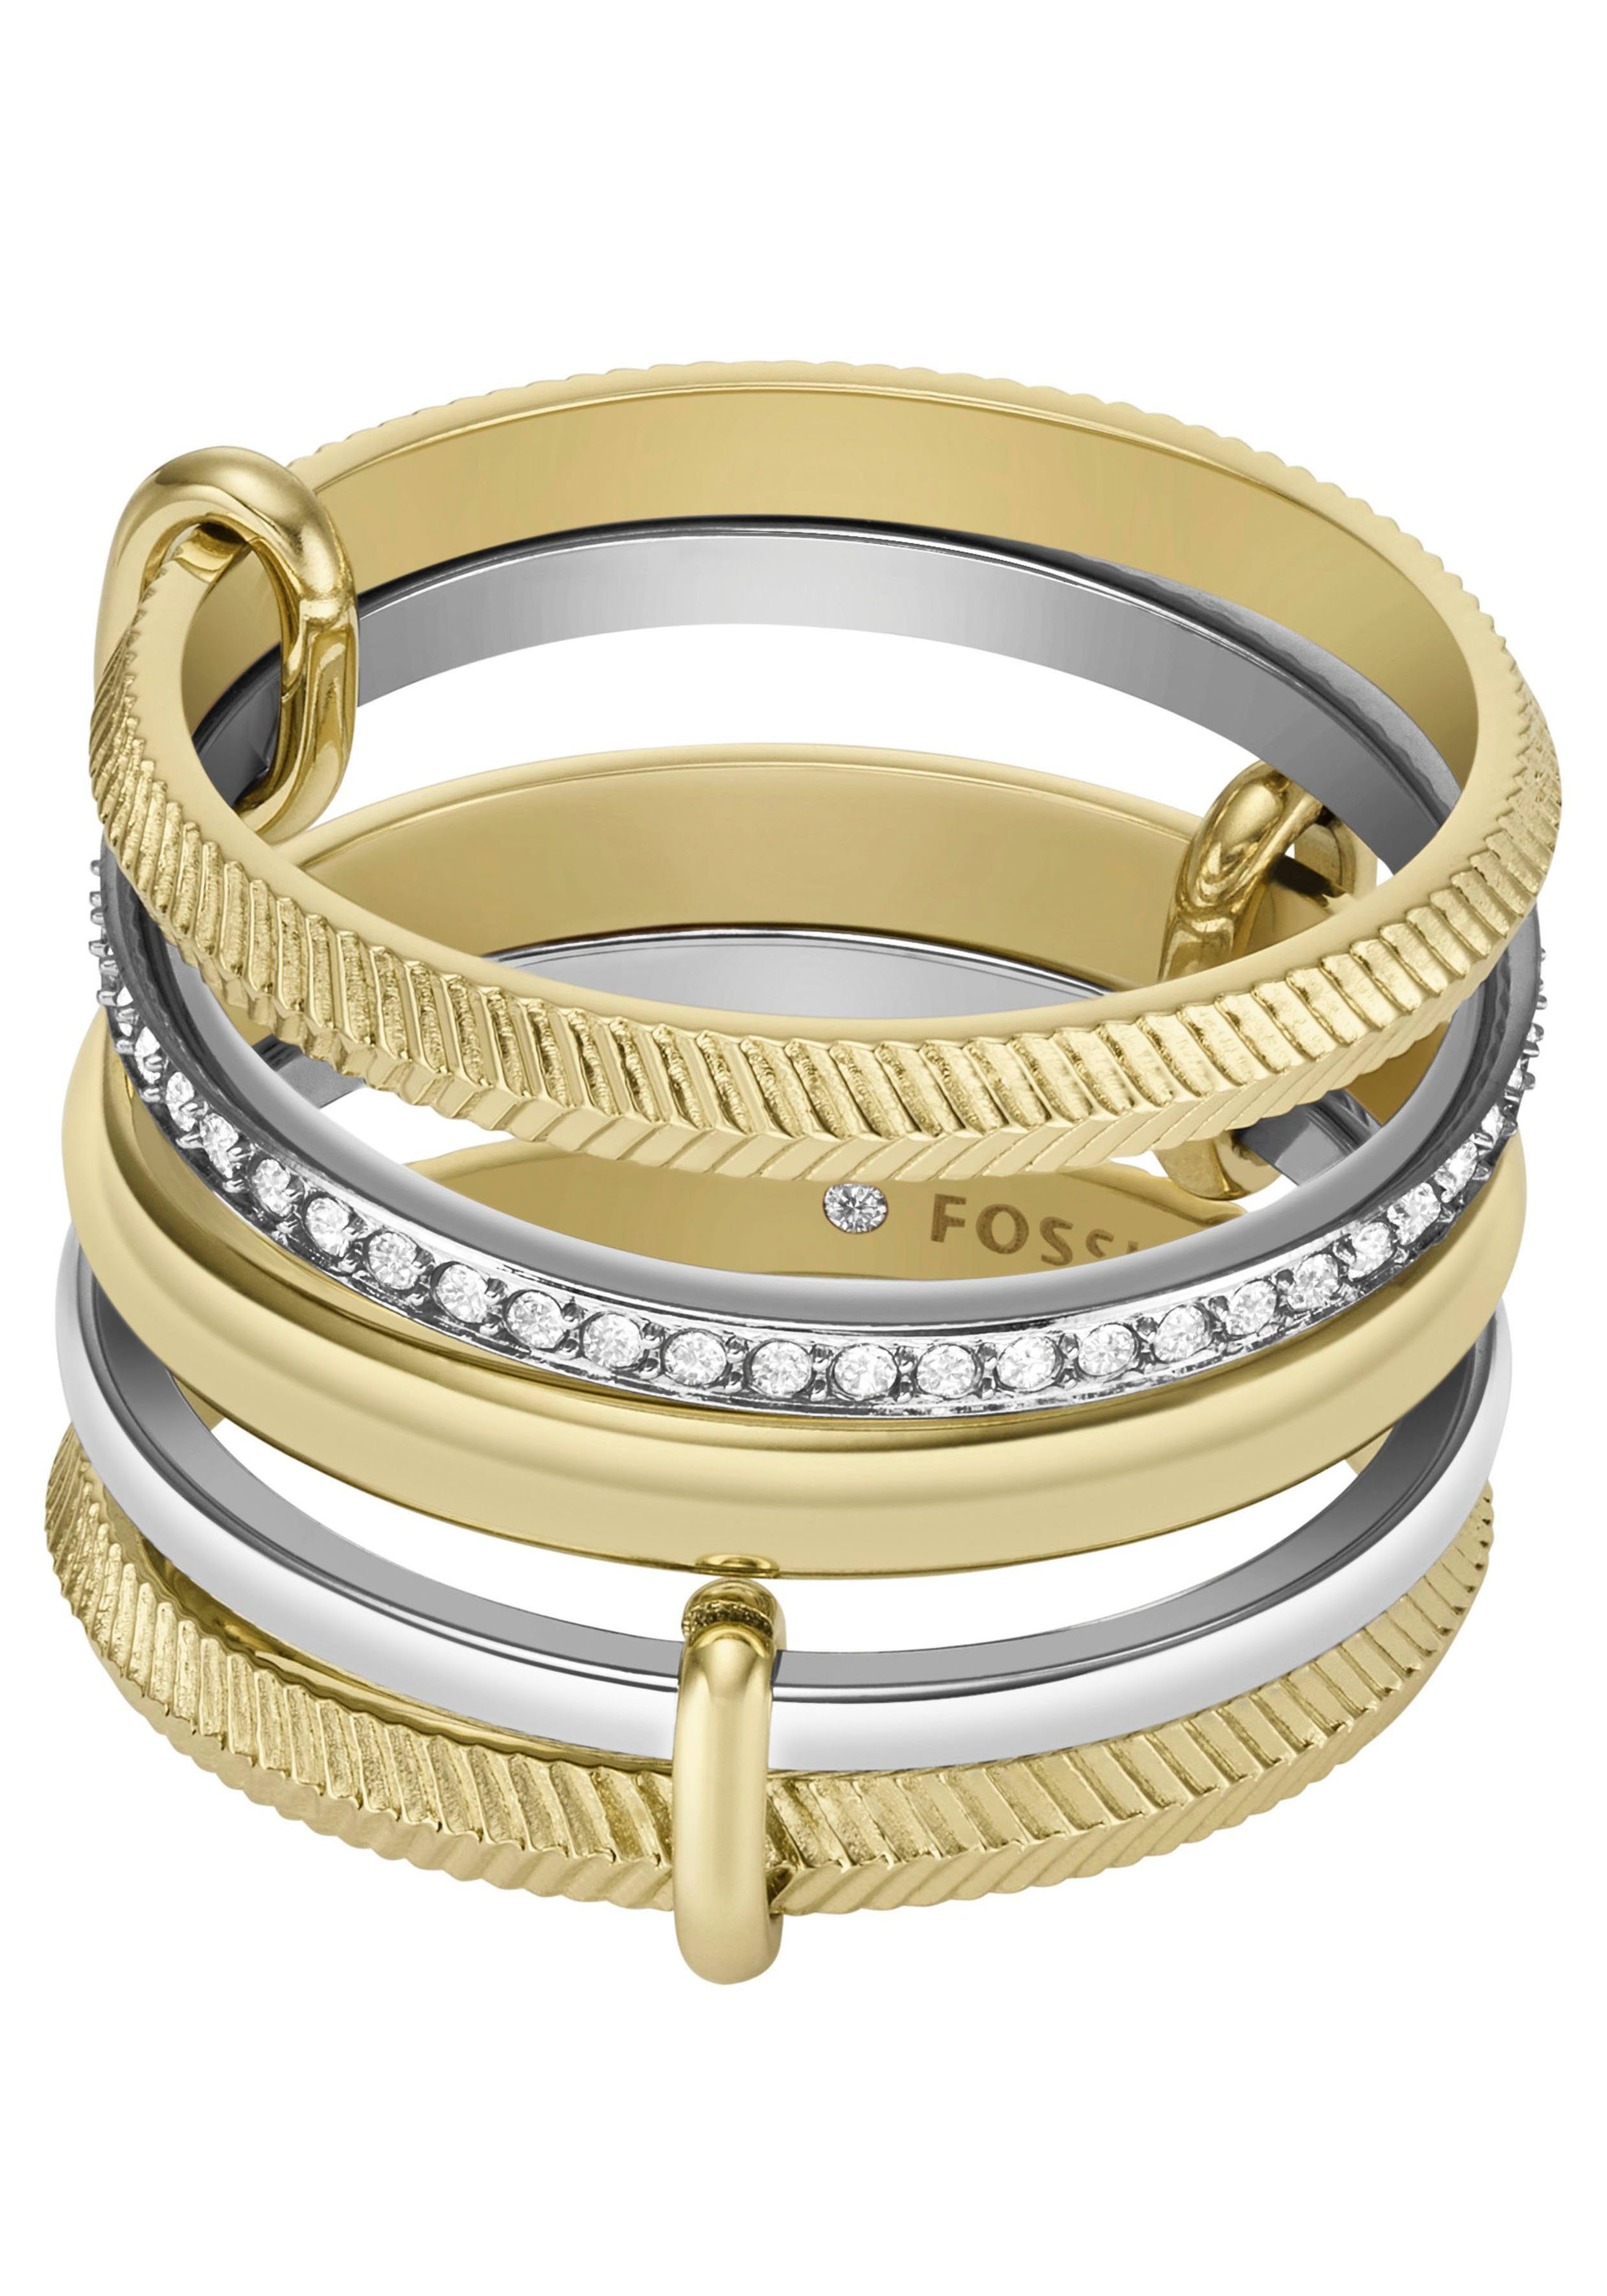 PRESTACK JF04592998, STACKED Fingerring JEWELRY Glassteinen Fossil RING, ALL TWO-TONE UP mit